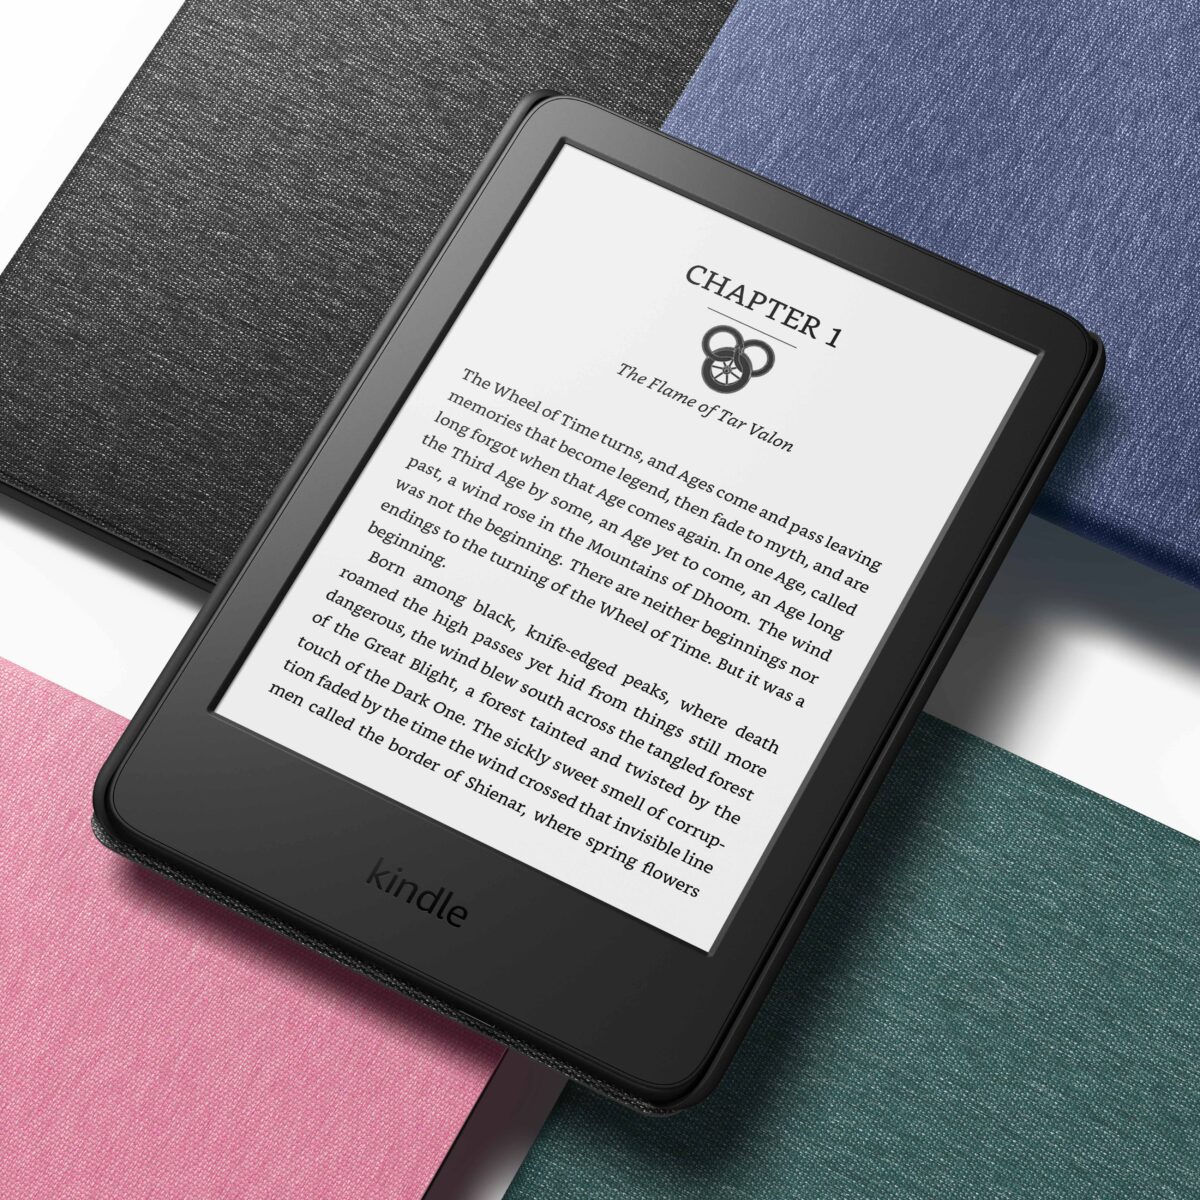 XKindle Black Covers 1200x1200 .pagespeed.ic.Fx2QiQu46t 